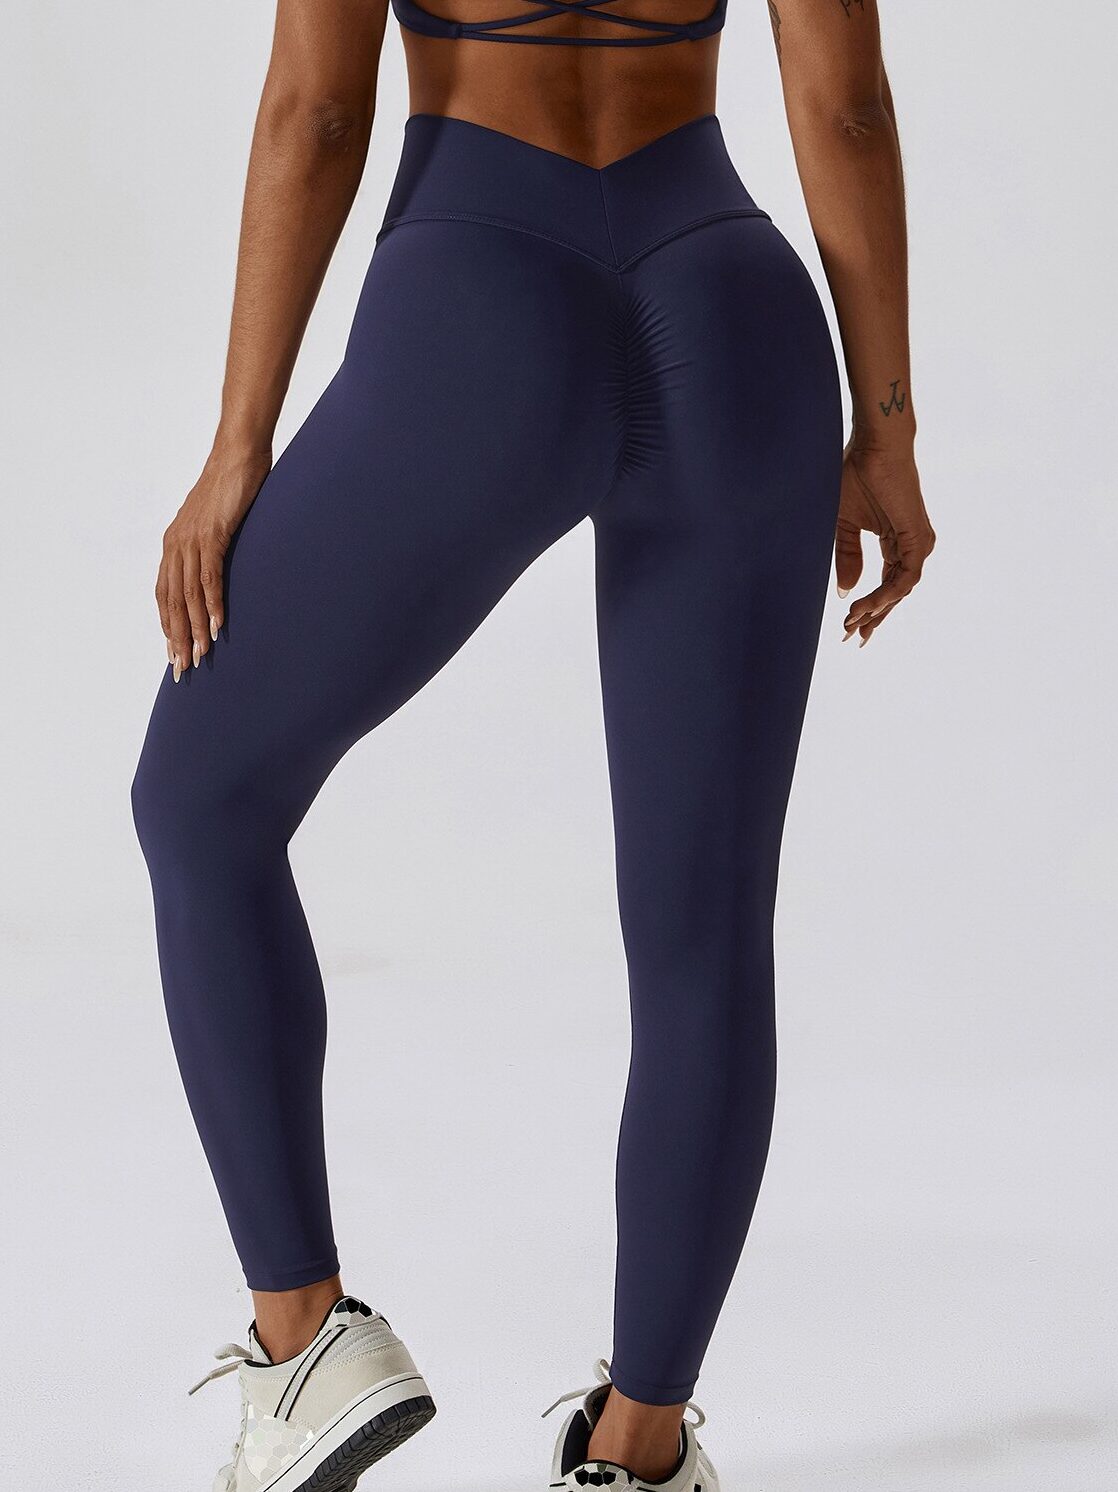 https://valueyoga.co/wp-content/uploads/2023/06/Fashionista-Approved-Backless-Spaghetti-Strap-Sports-Bra-amp-V-Waist-Scrunch-Butt-Leggings---Perfect-for-Working-Out-or-Lounging-Around-e1687532466400.jpg